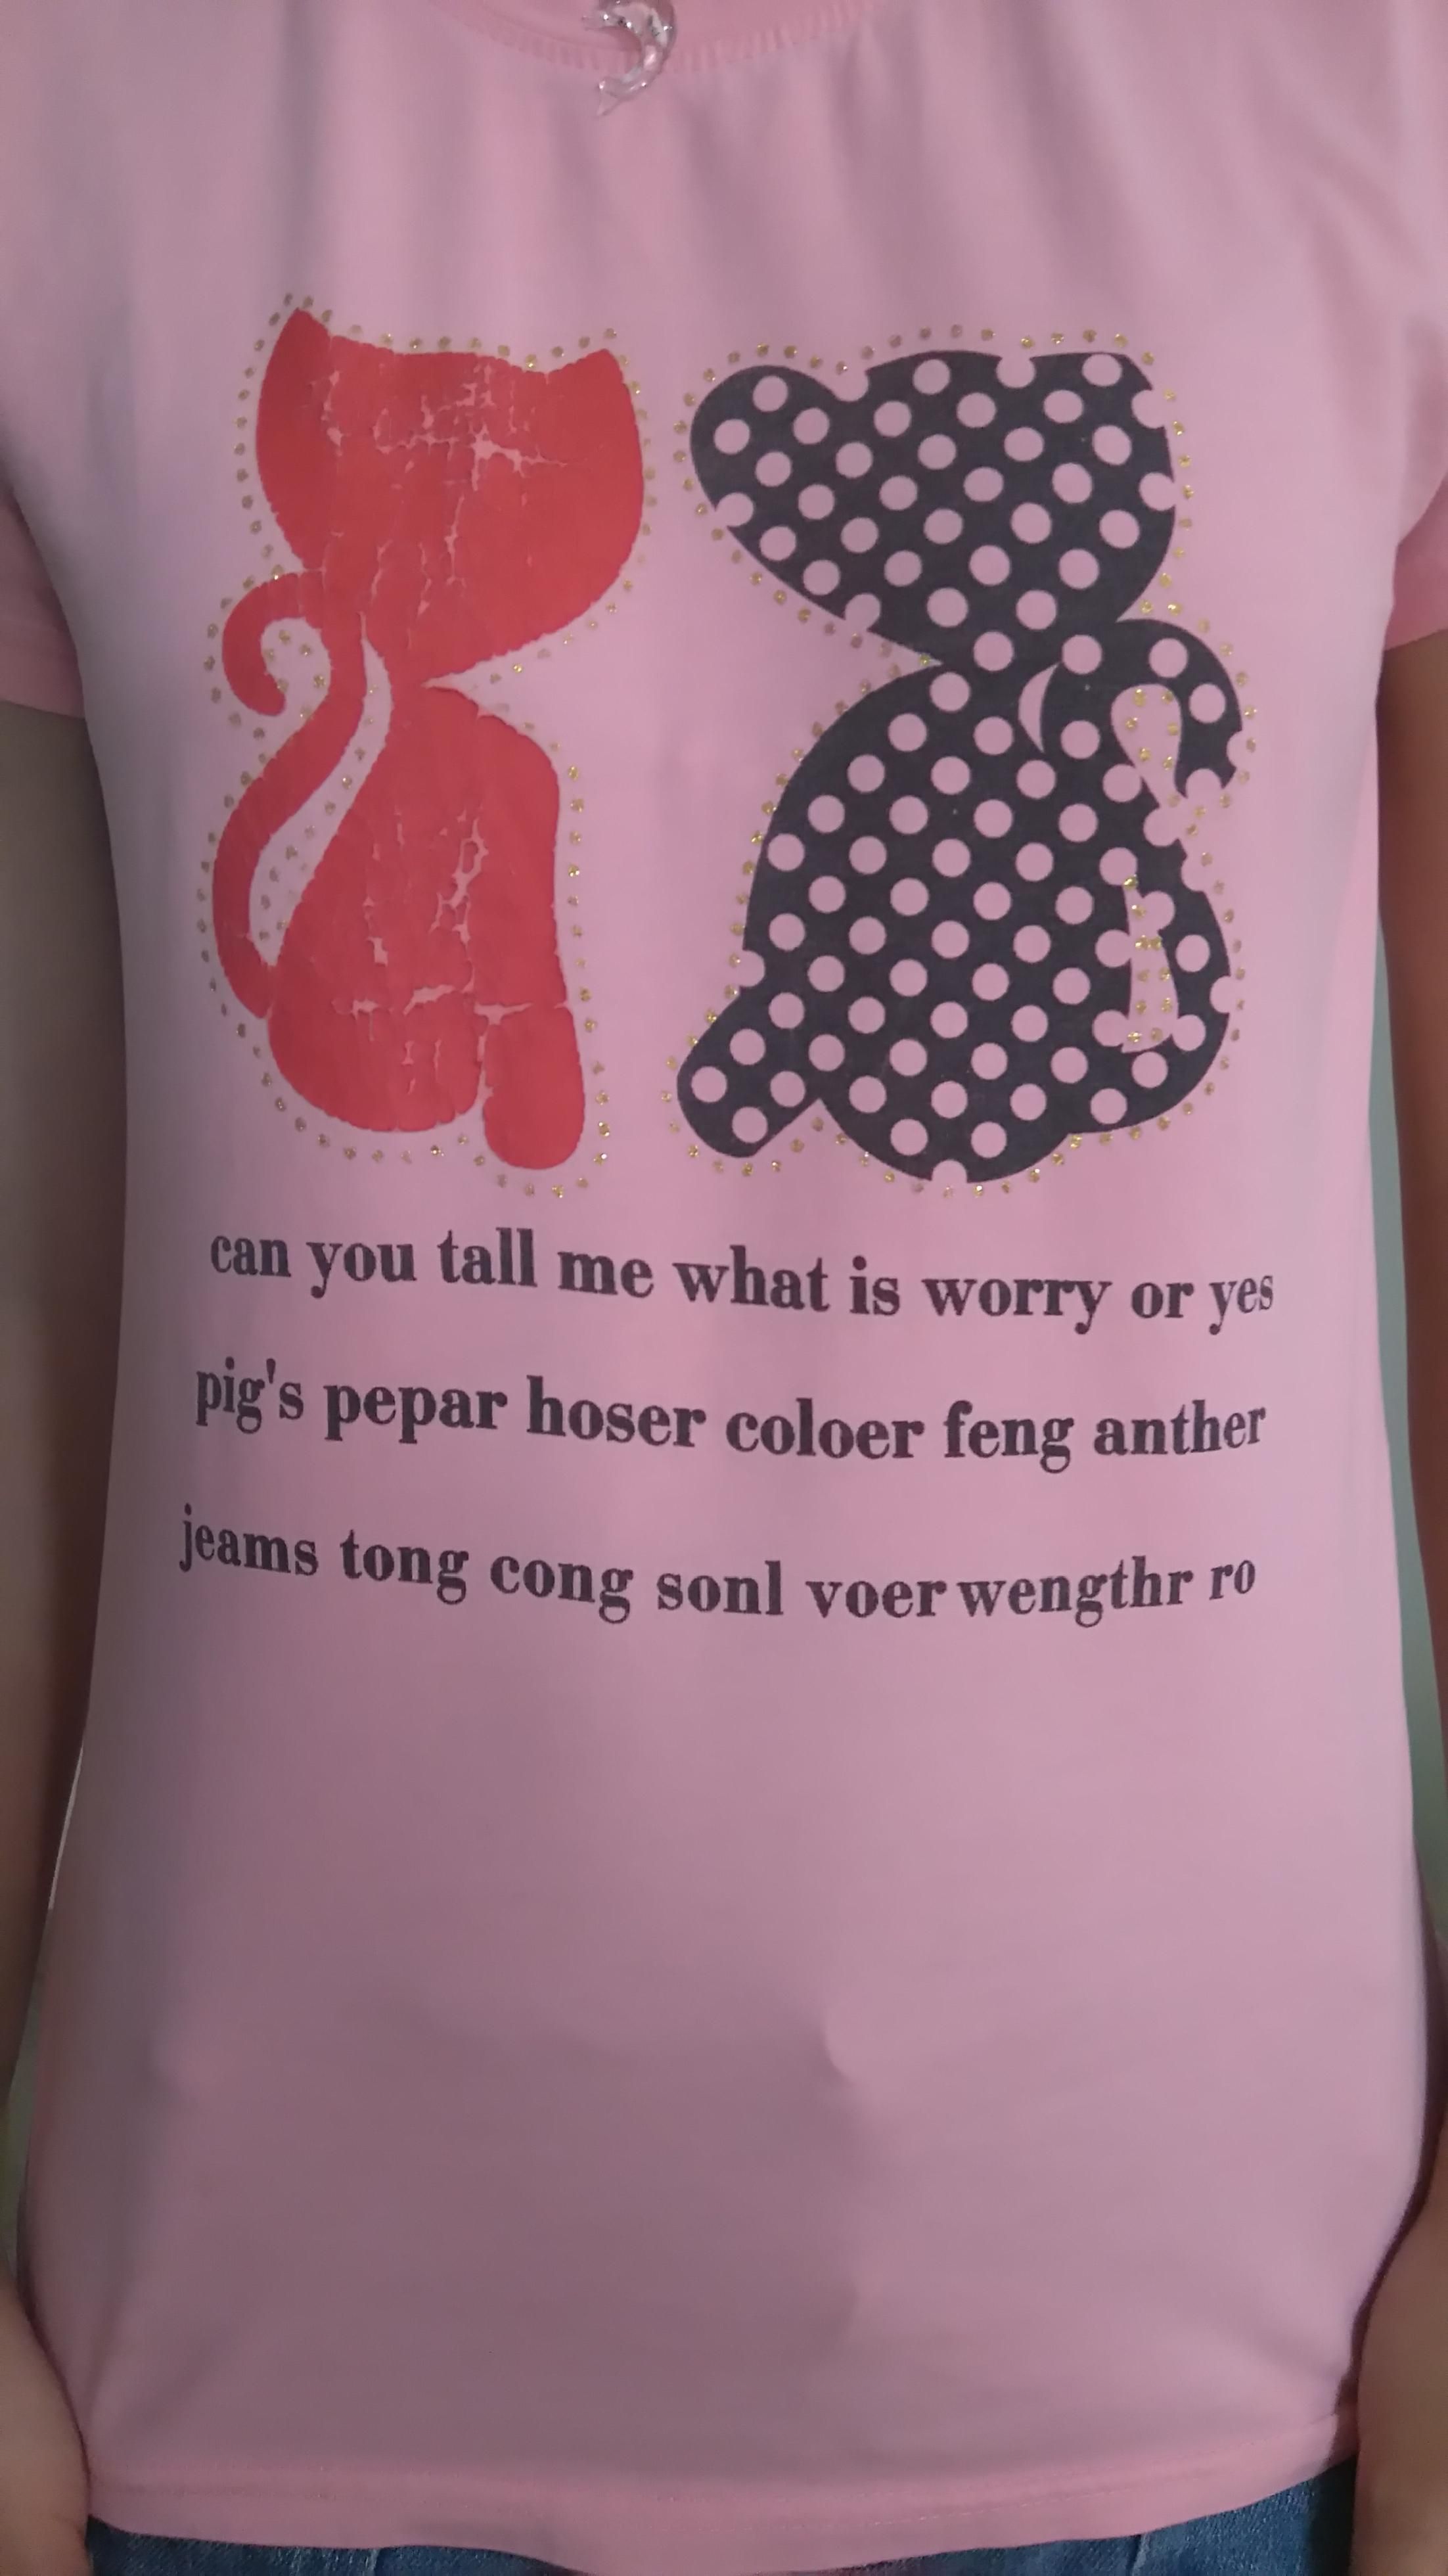 Here's a shirt my sister bought from an Asian store... It just gets worse as it goes.